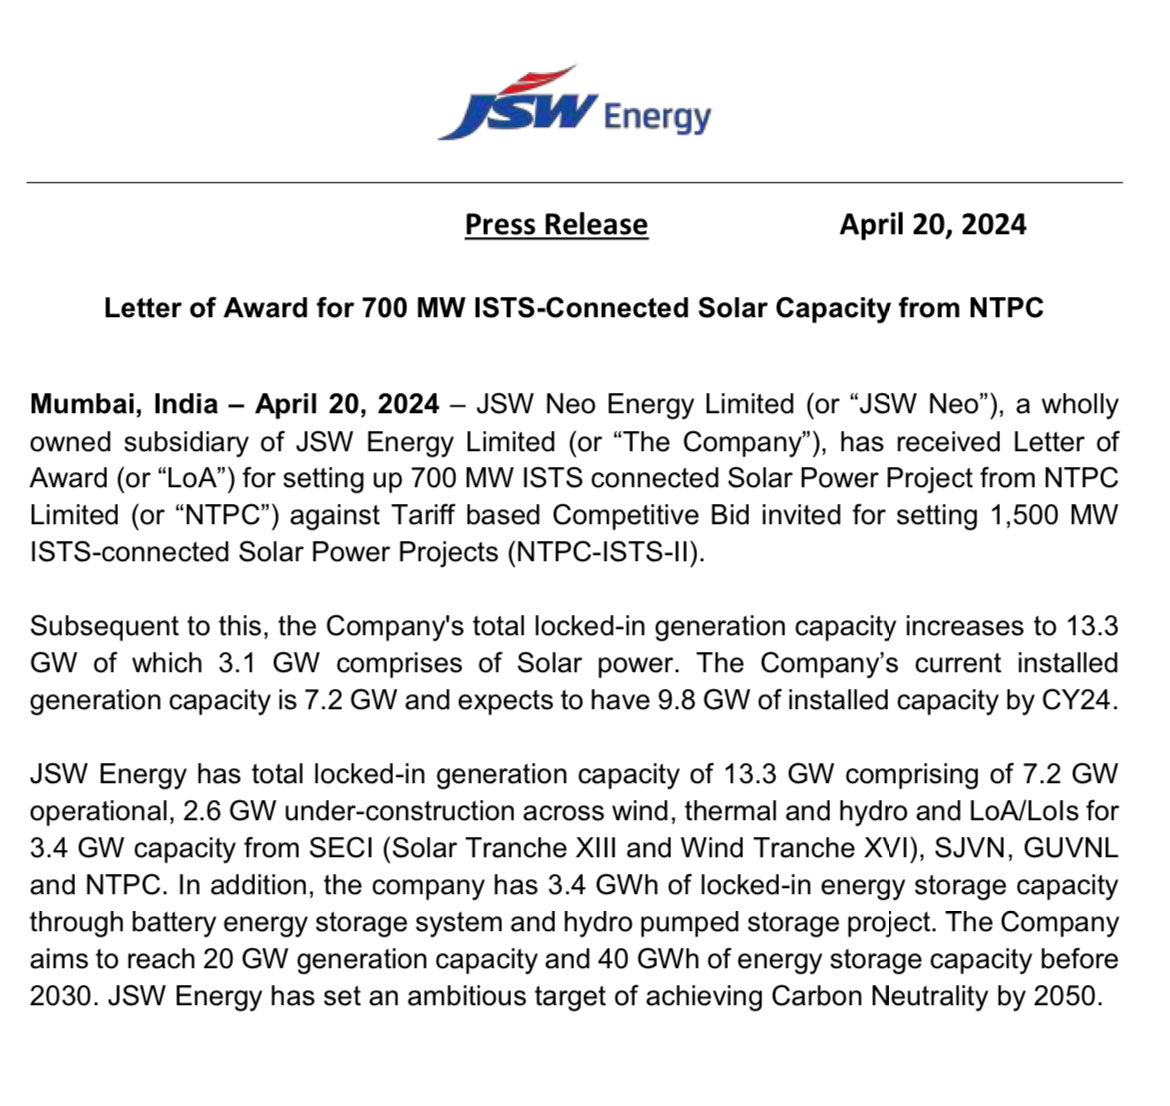 JSW energy - Letter of Award for 700 MW ISTS-Connected Solar Capacity from NTPC ✅

#jswenerrgy #sabarisecurities